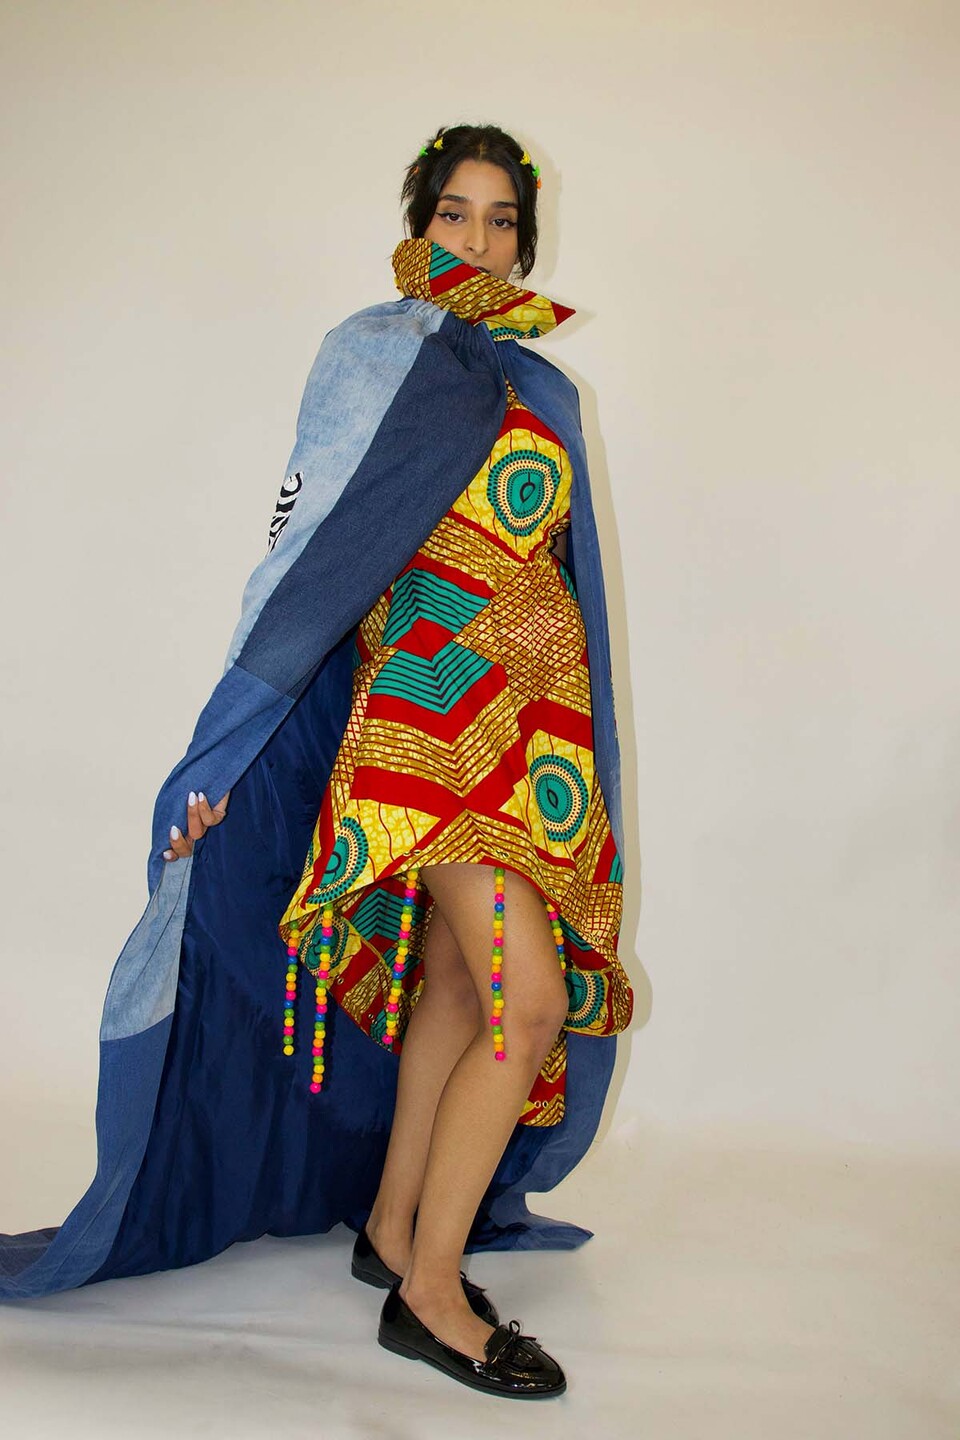 Woman models an African print dress in yellow, red, brown and teal with strings of coloured beads hanging from the hem and a large floor length upcycled denim cape.